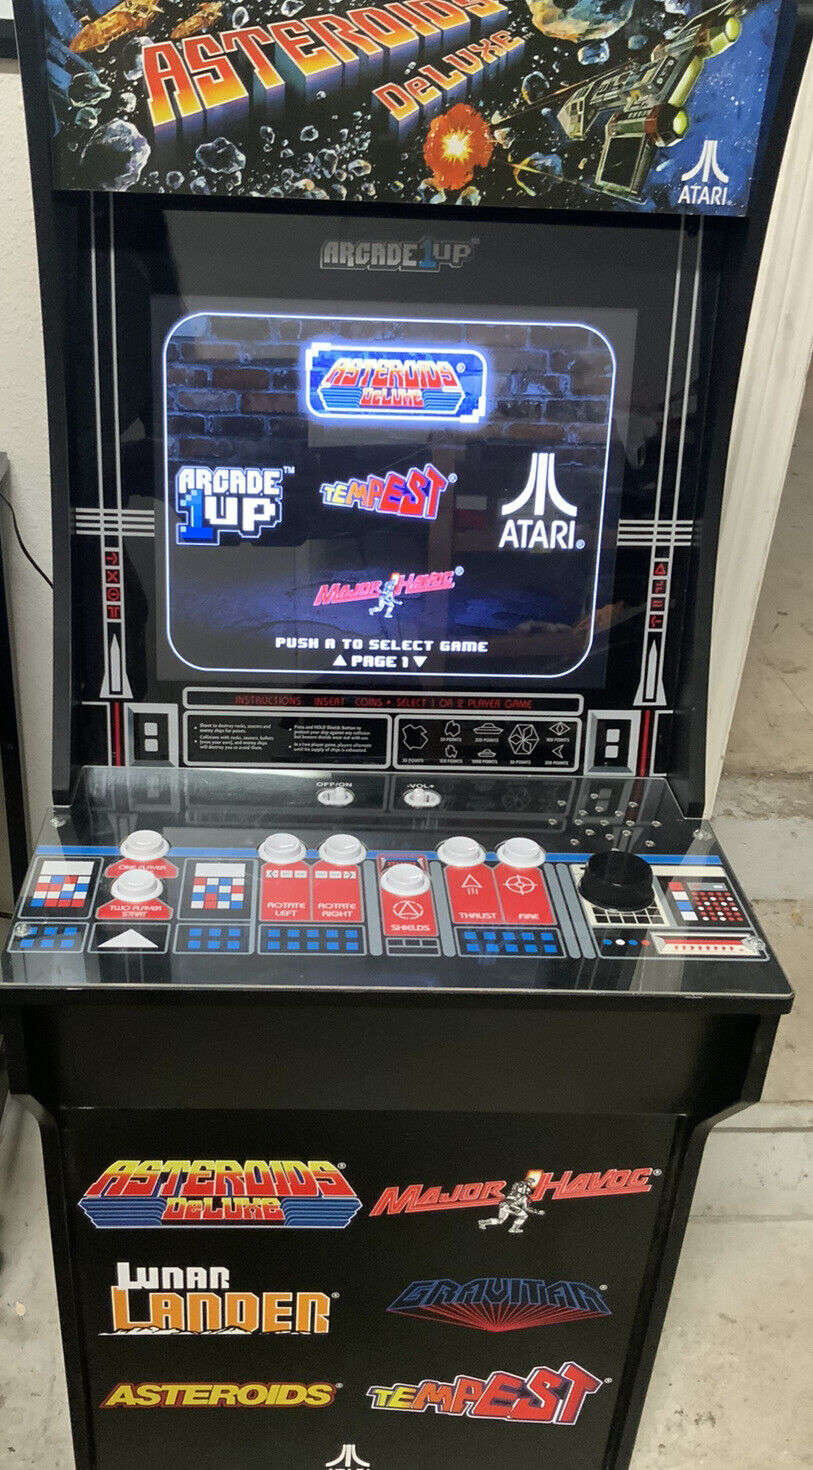 🧷 ARCADE 1up ASTEROIDS DELUXE 6in 1 games, 4ft, Great Conditions 👌